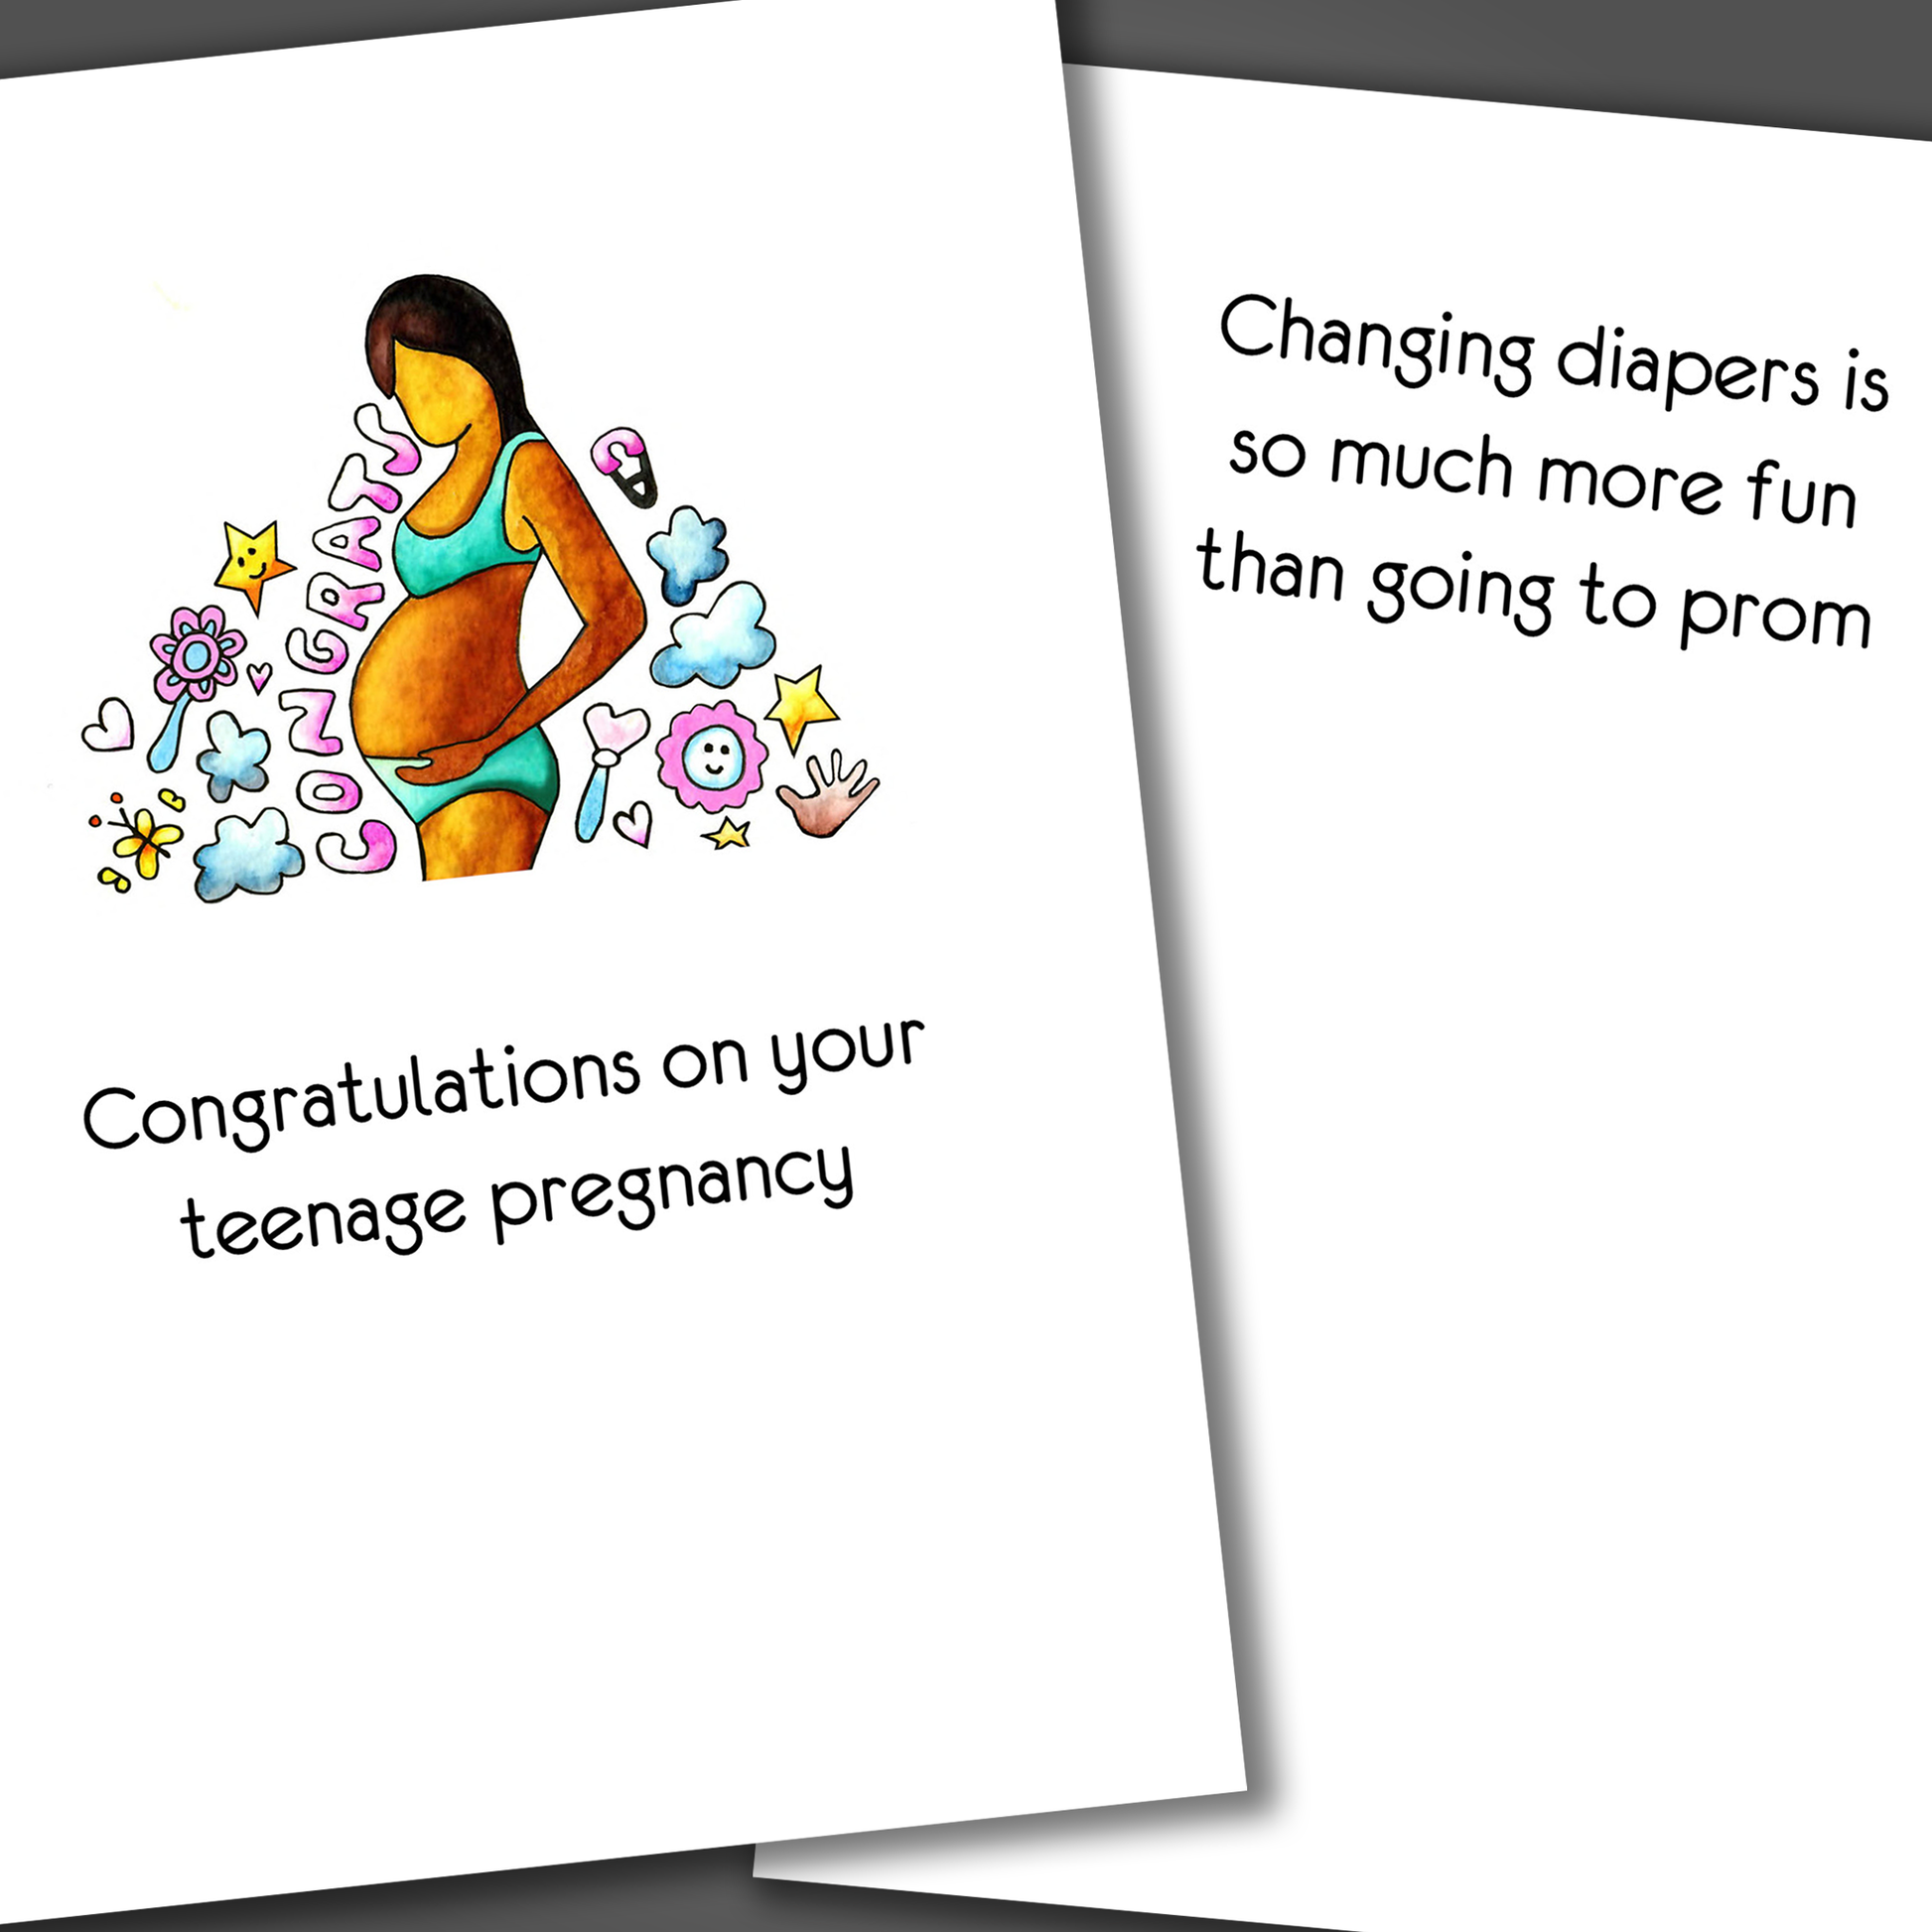 Funny pregnancy announcement card with pregnant teen on front of card and funny joke inside of the card that says changing diapers is so much more fun than going to prom.